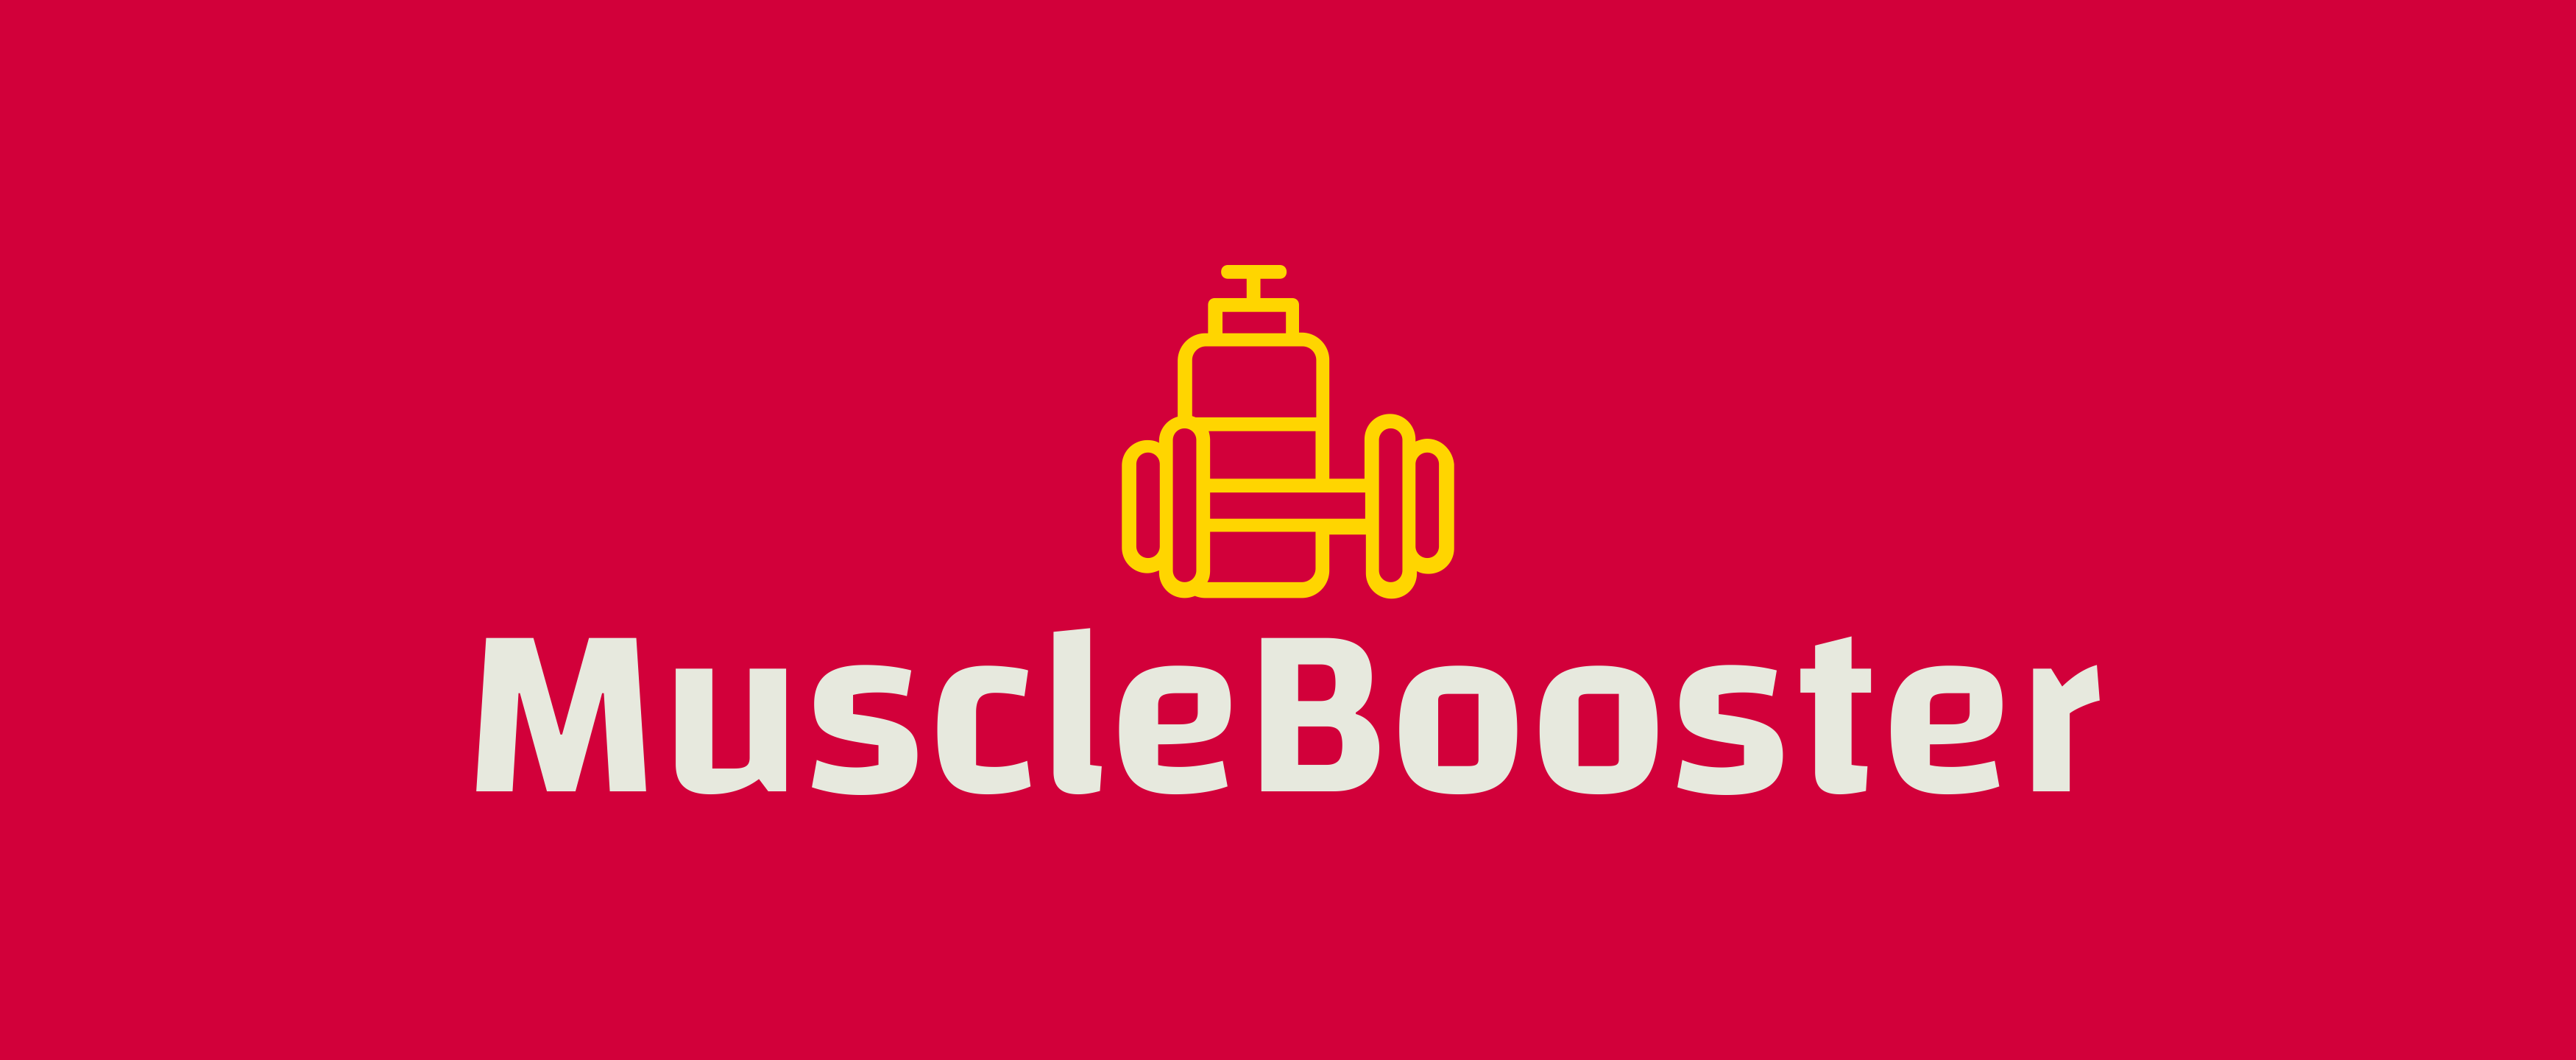 Muscle-Booster.com